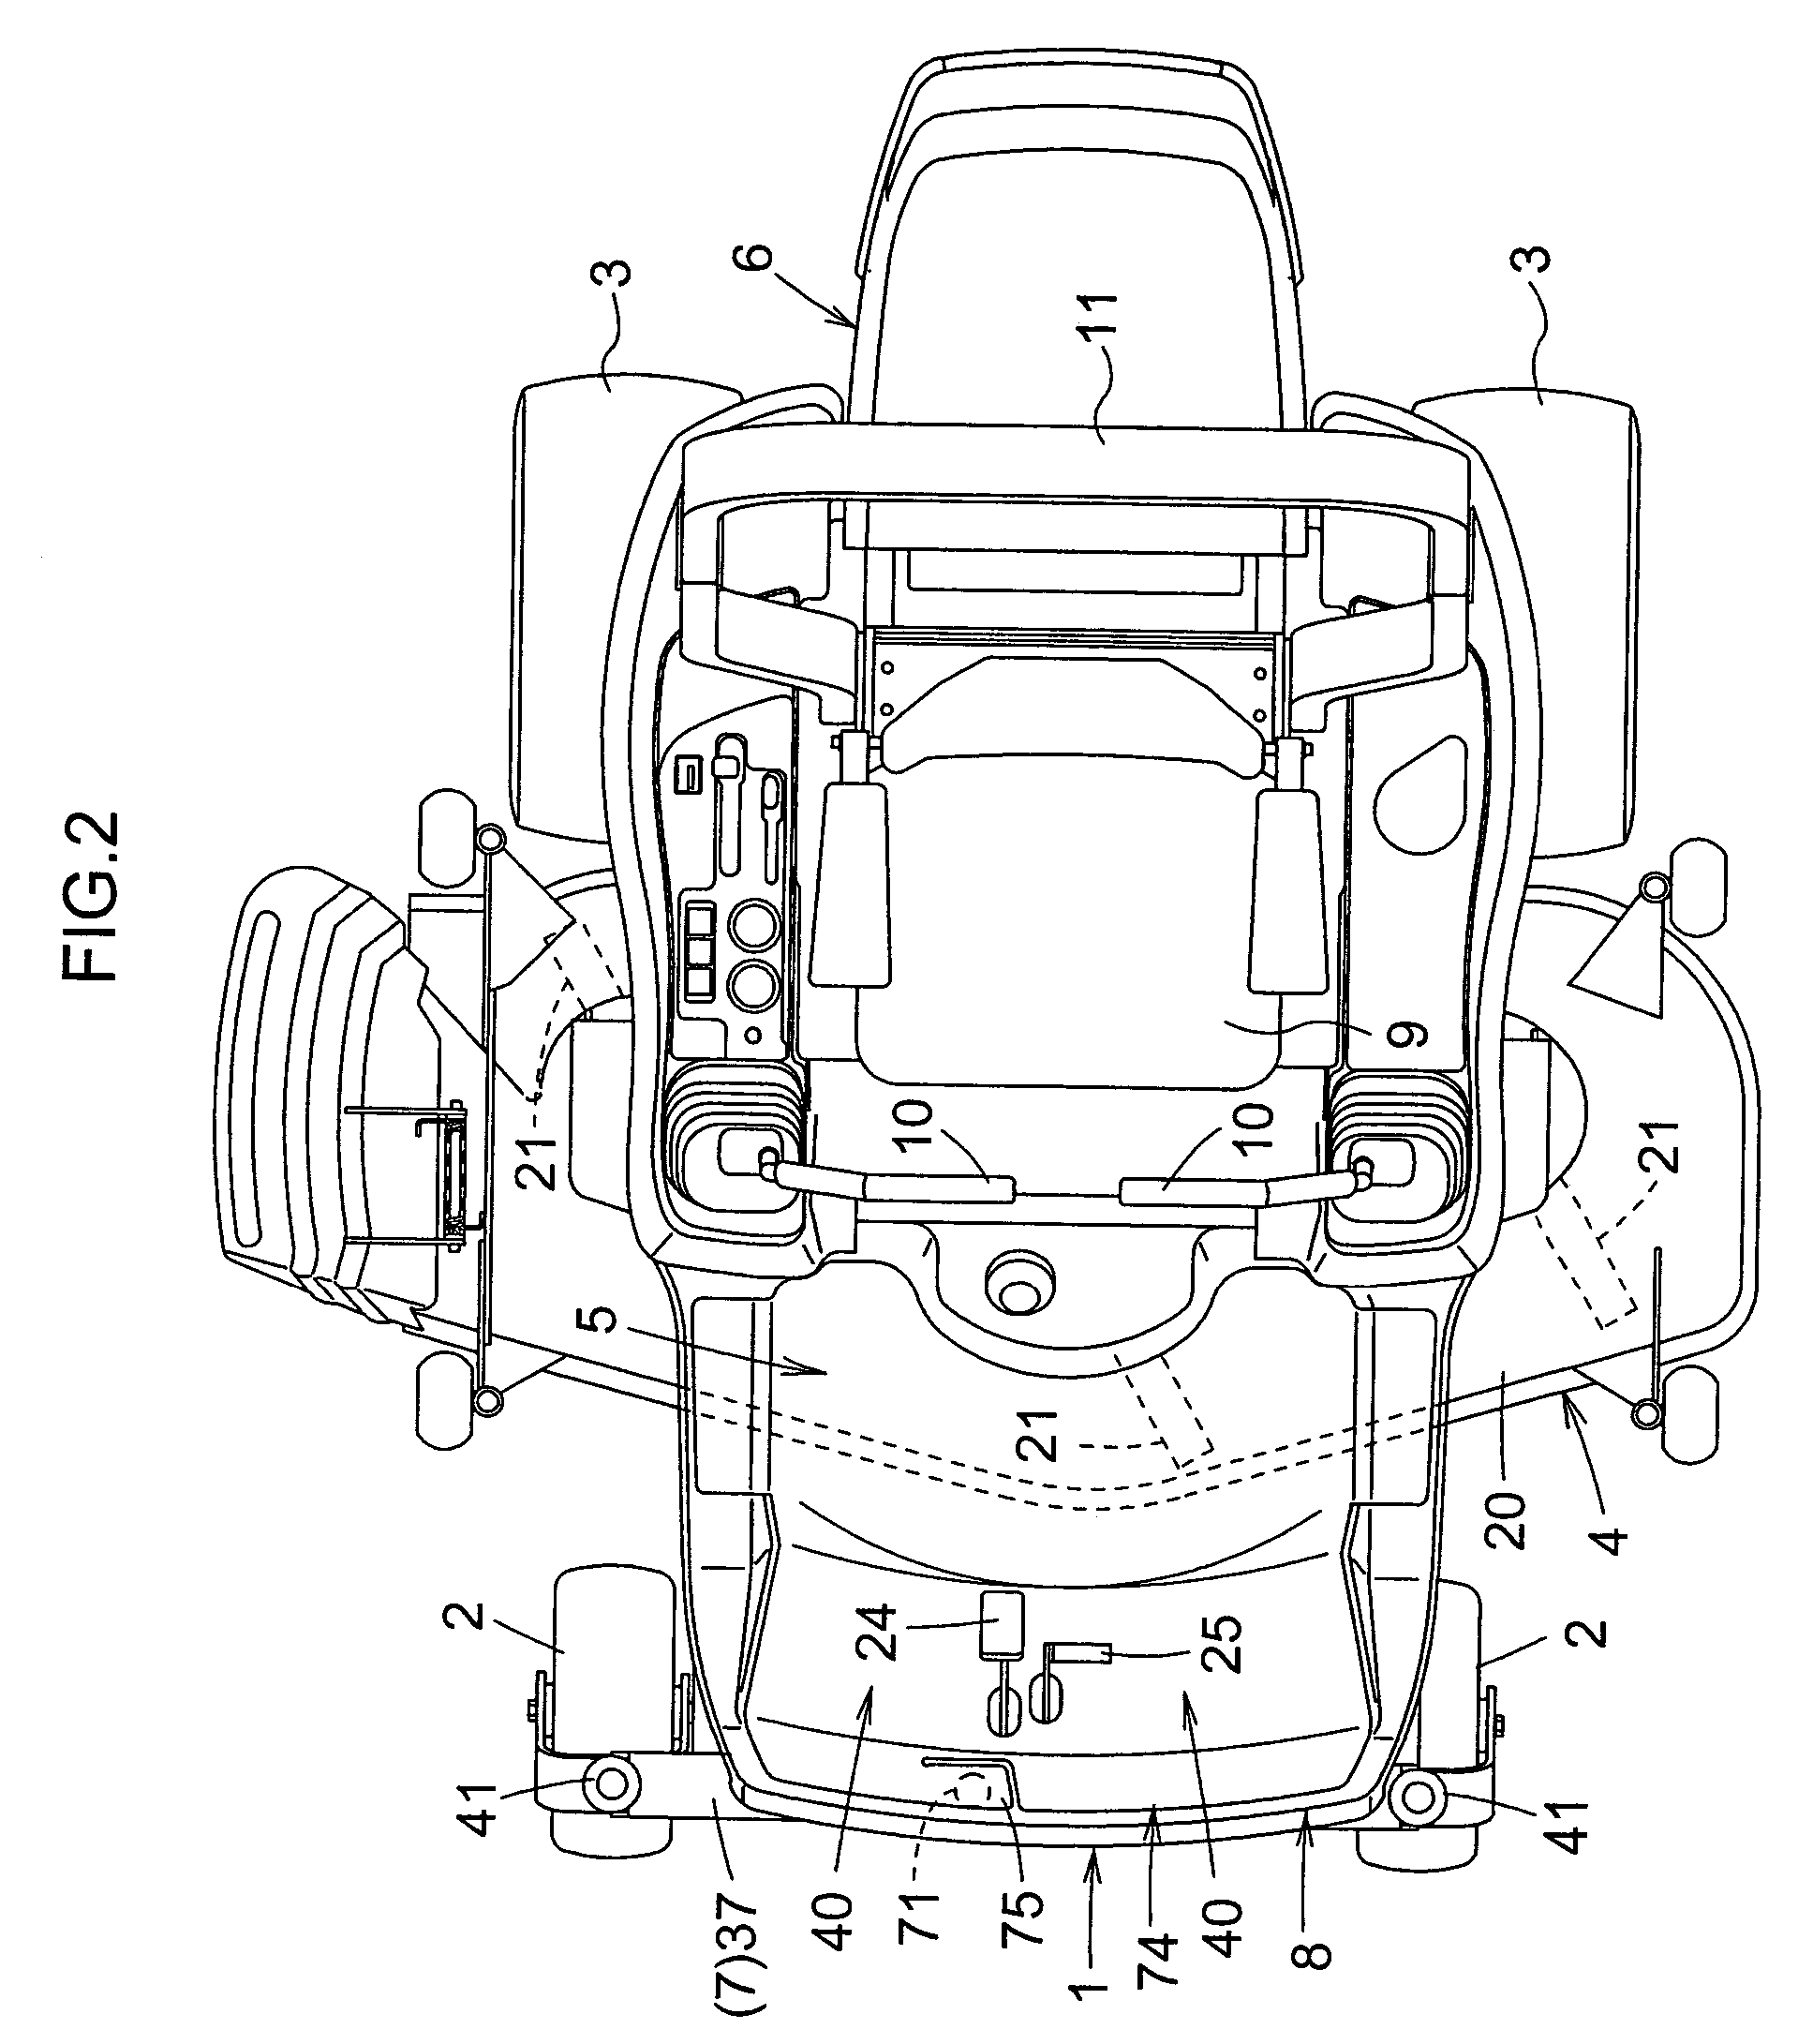 Mid-mount mower having a mower unit disposed between front and rear wheels